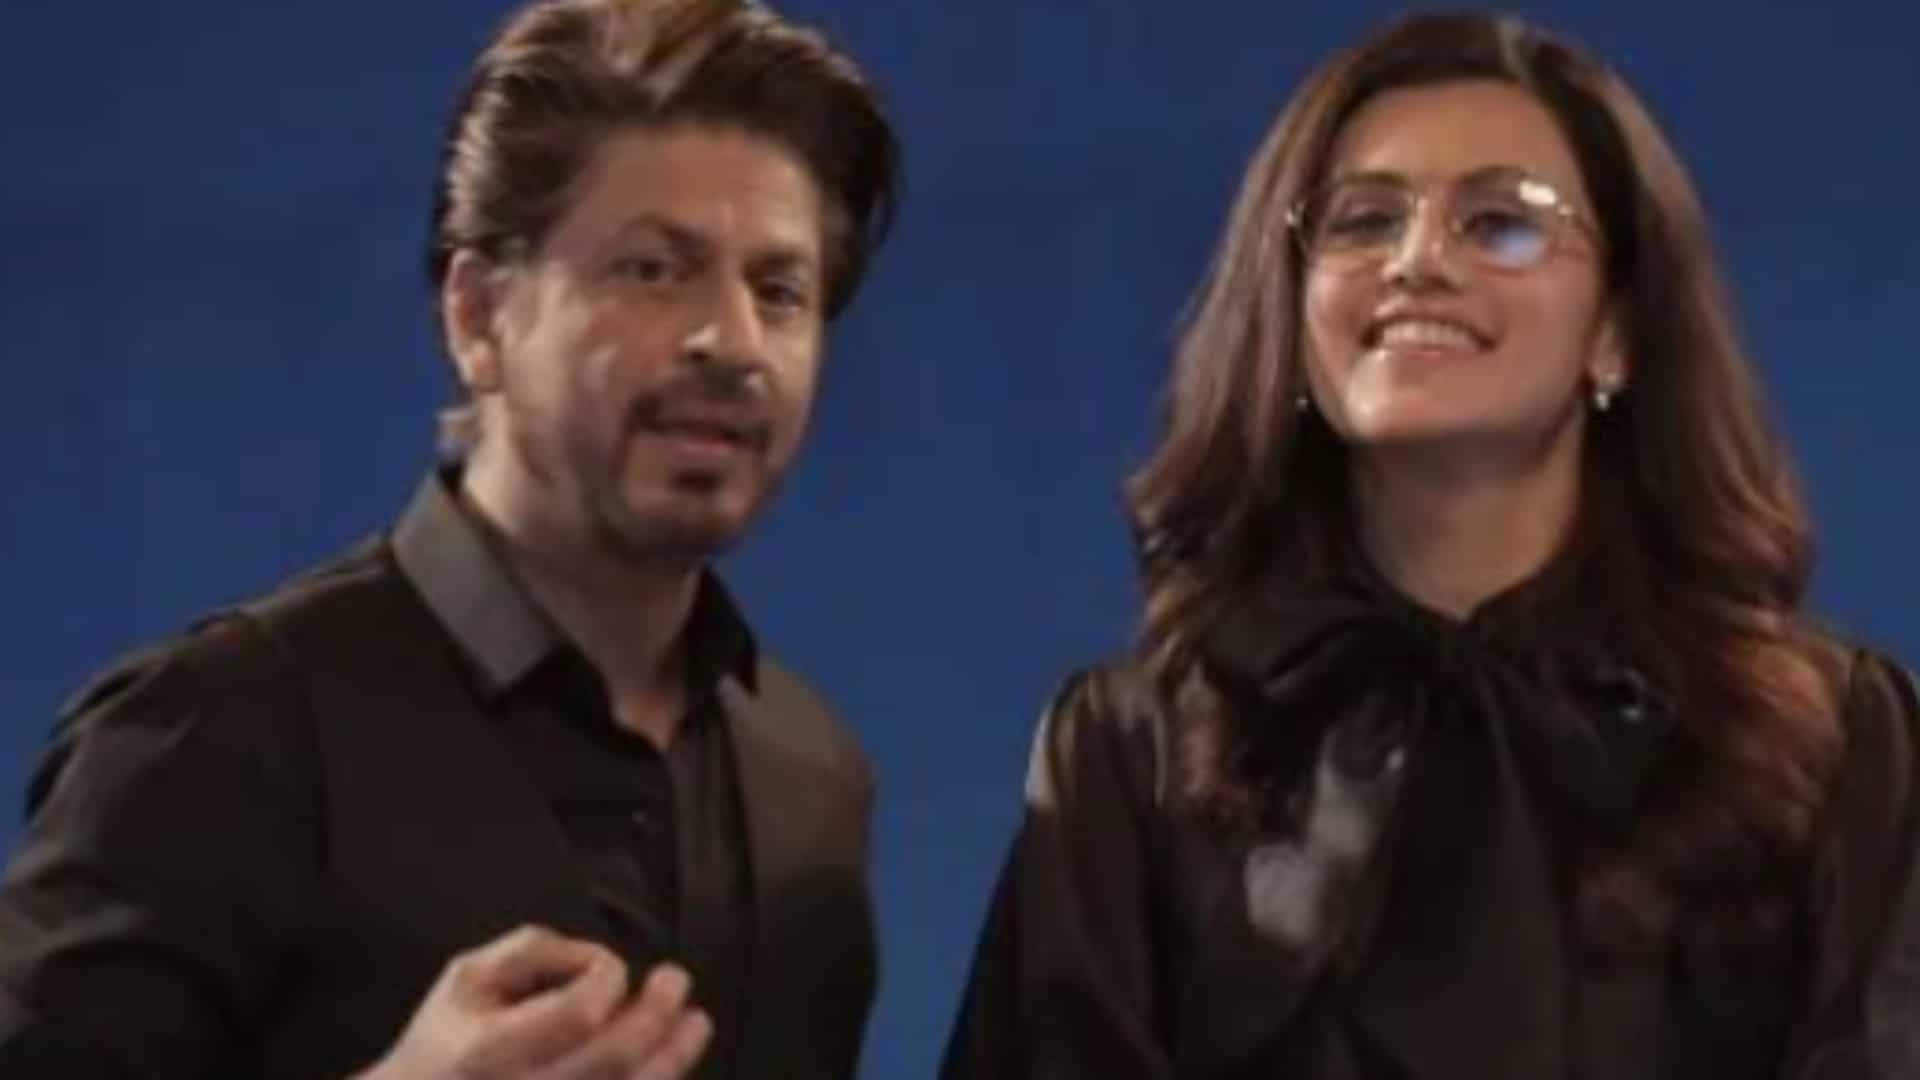 Did you know Taapsee Pannu has worked with Shah Rukh Khan before?